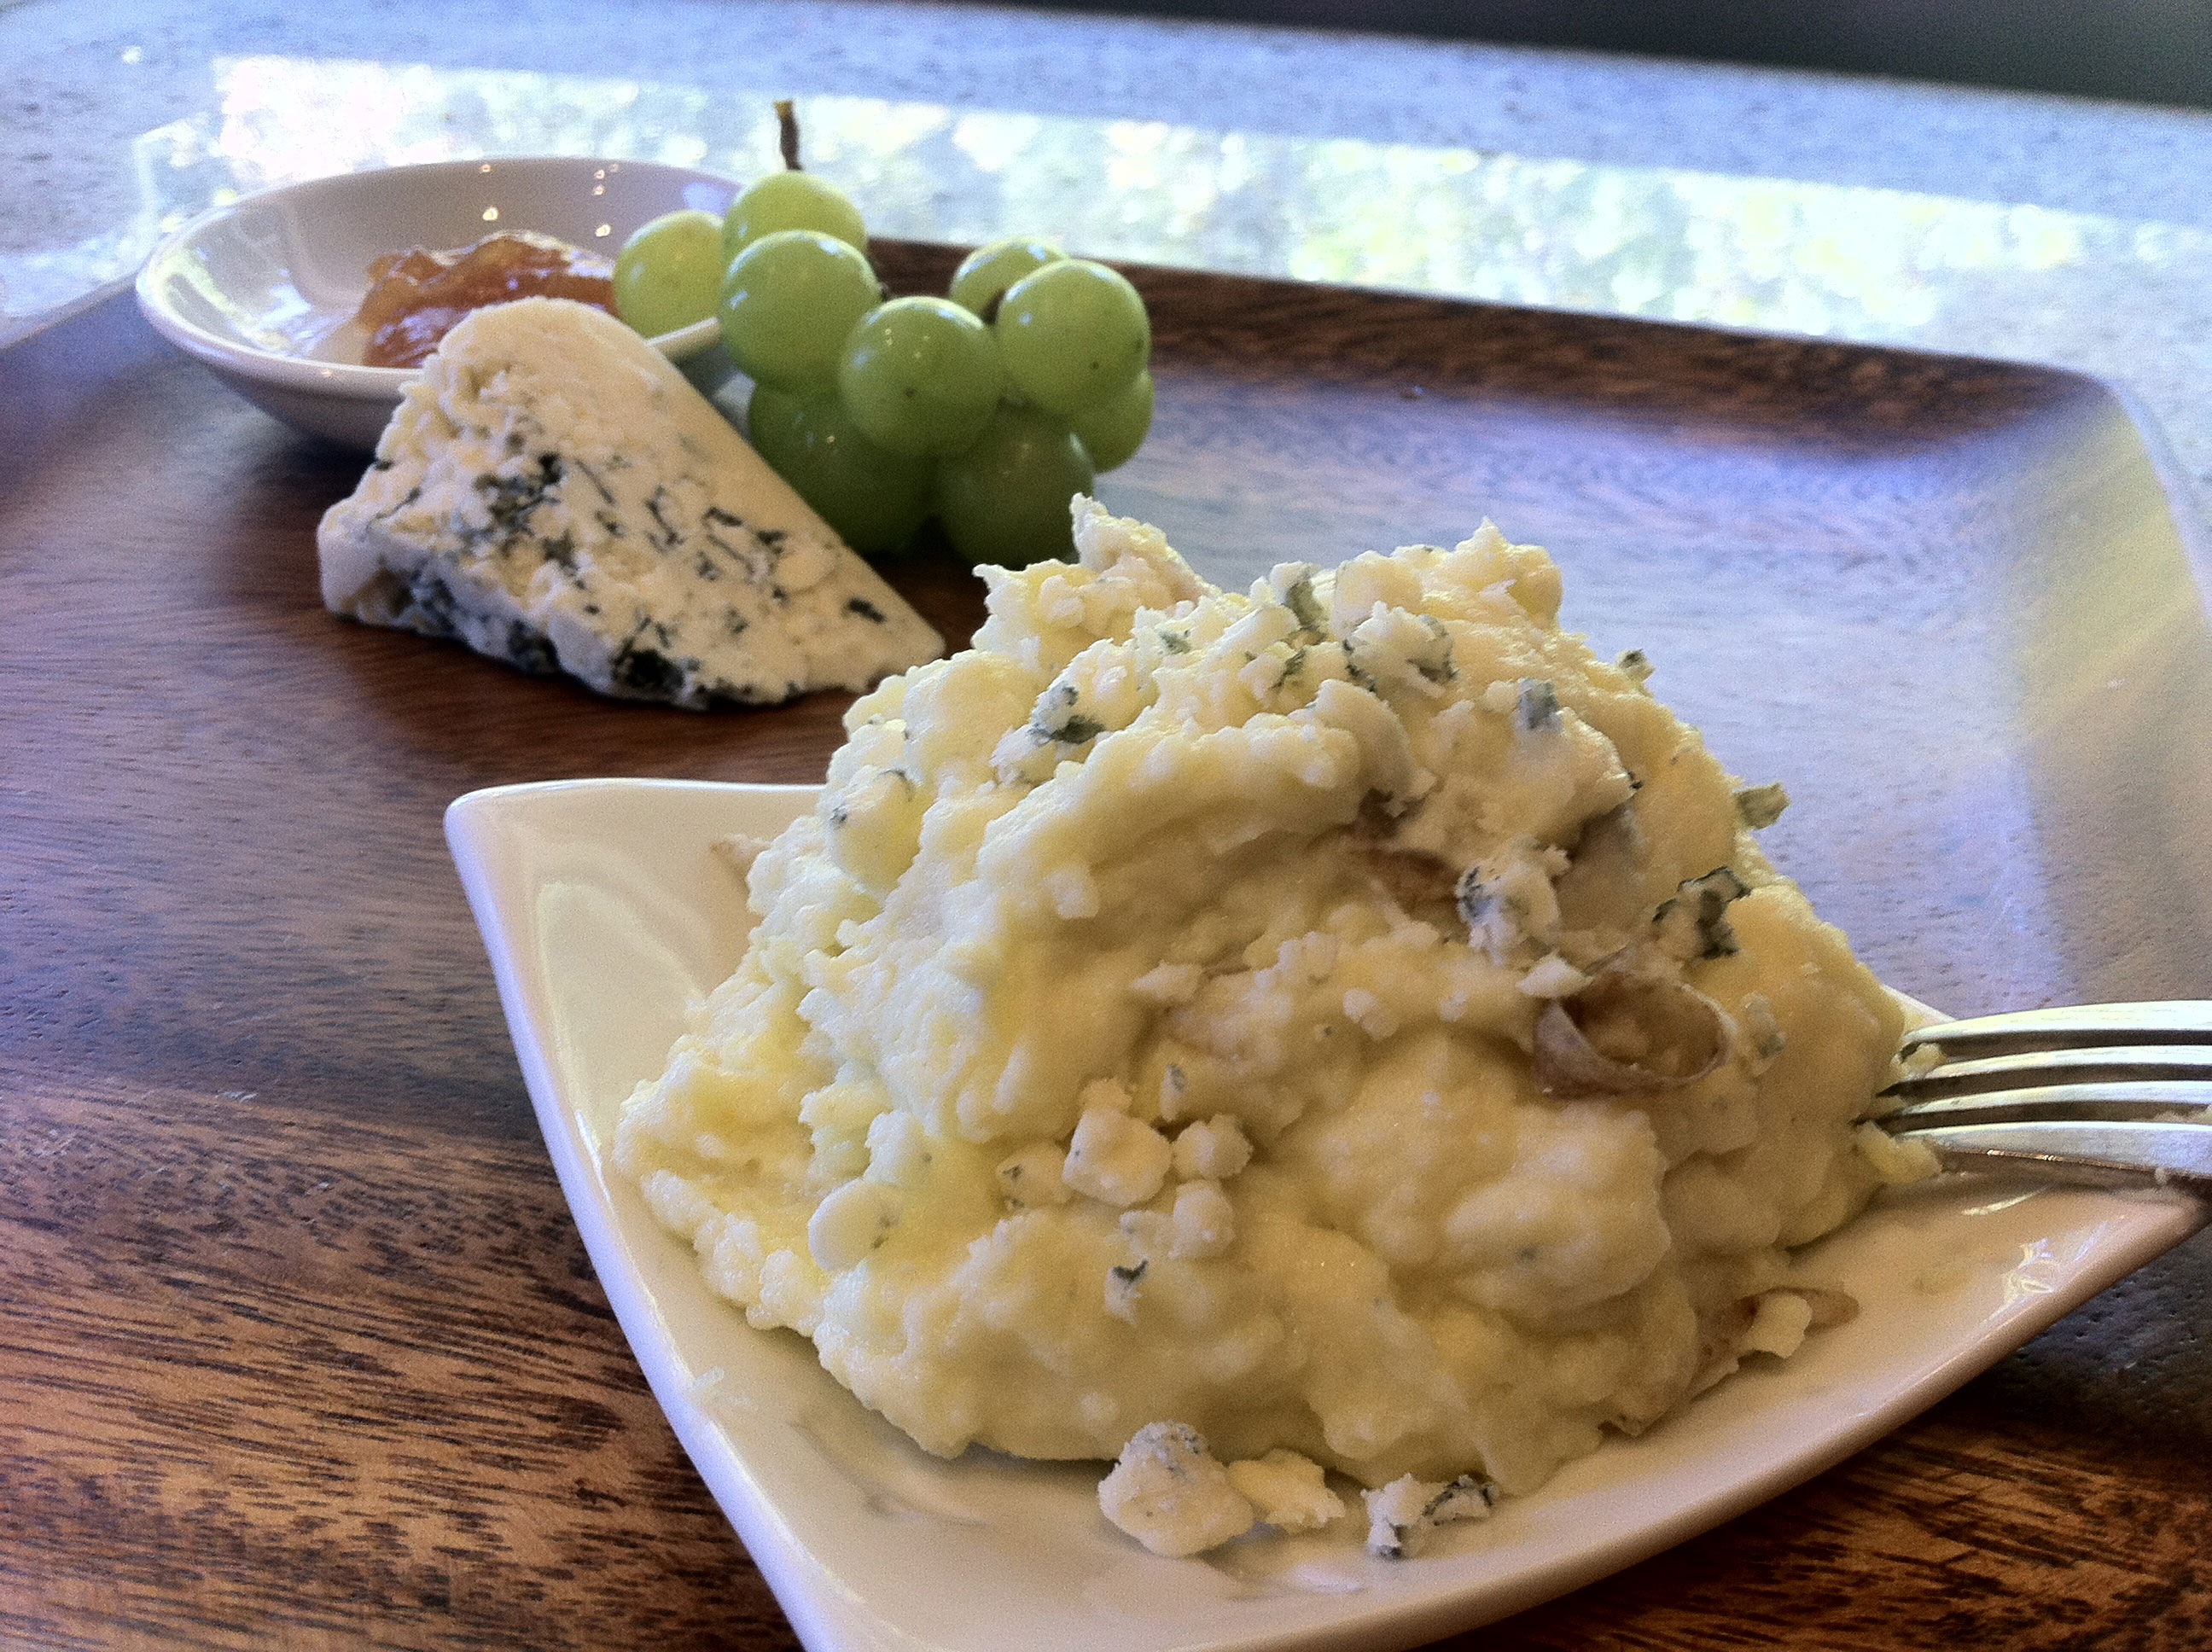 Mashed Potatoes with Blue Cheese